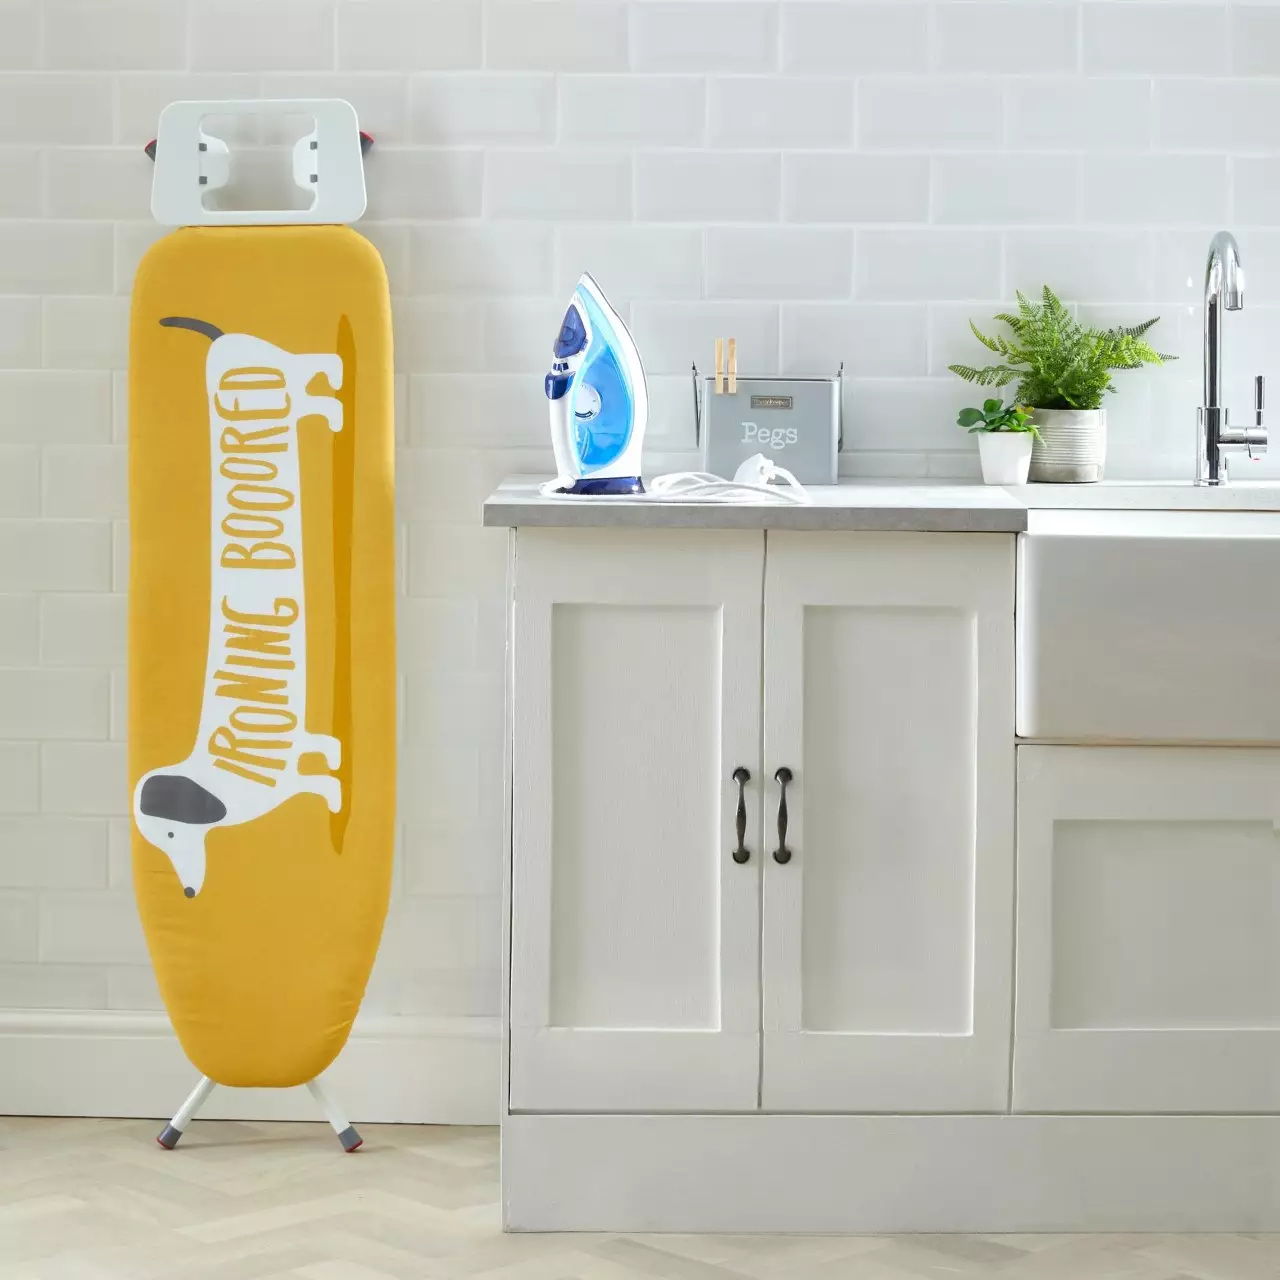 We'll be needing this adorable ironing board cover (